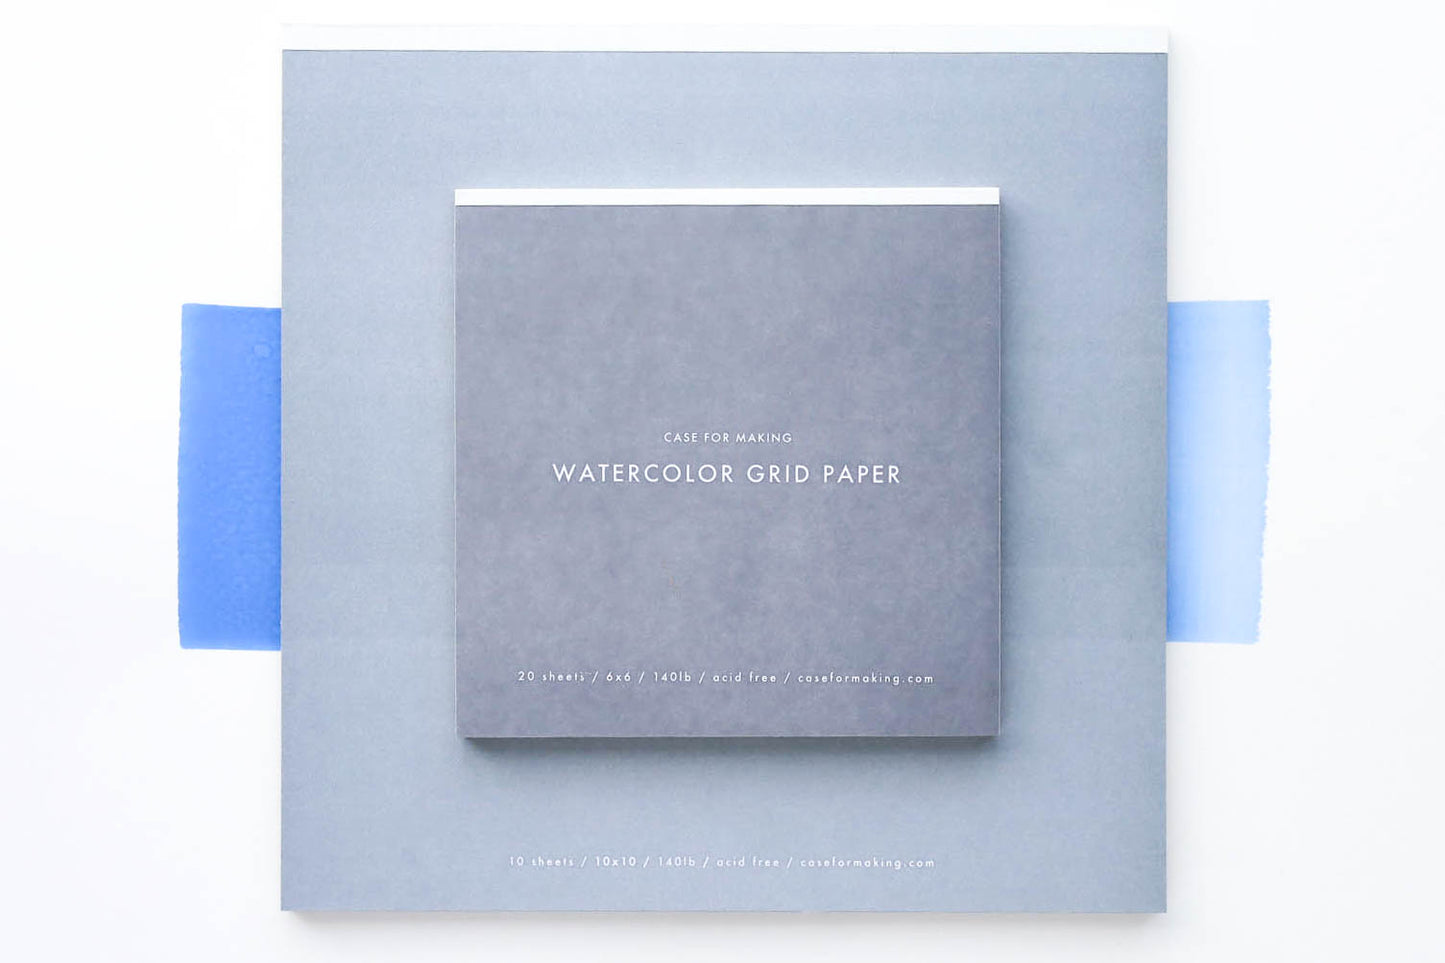 The closed, top-bound 6" x 6" and 10" x 10" Watercolor Grid Paper pads.  Showing the soft greycover with white lettering. 